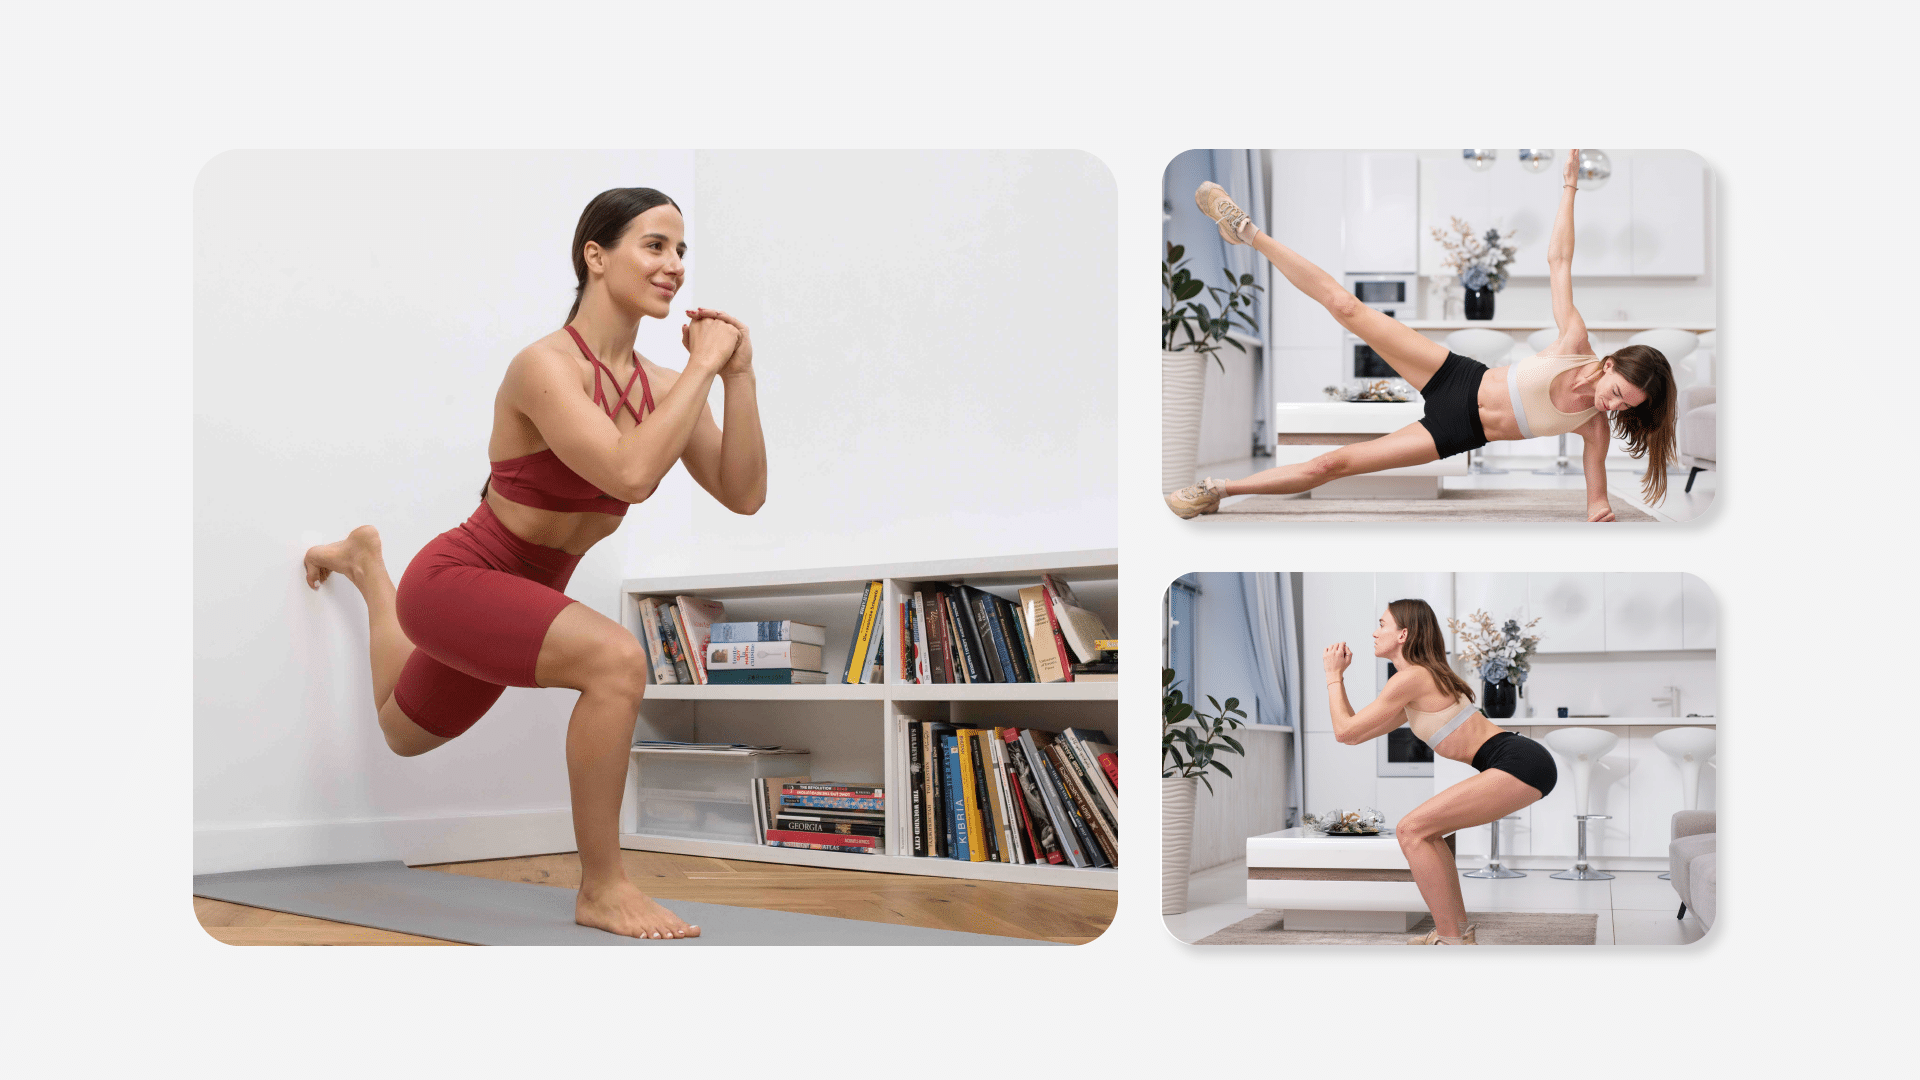 28-Day Wall Pilates Challenge: Stretch Your Limits With It! - BetterMe